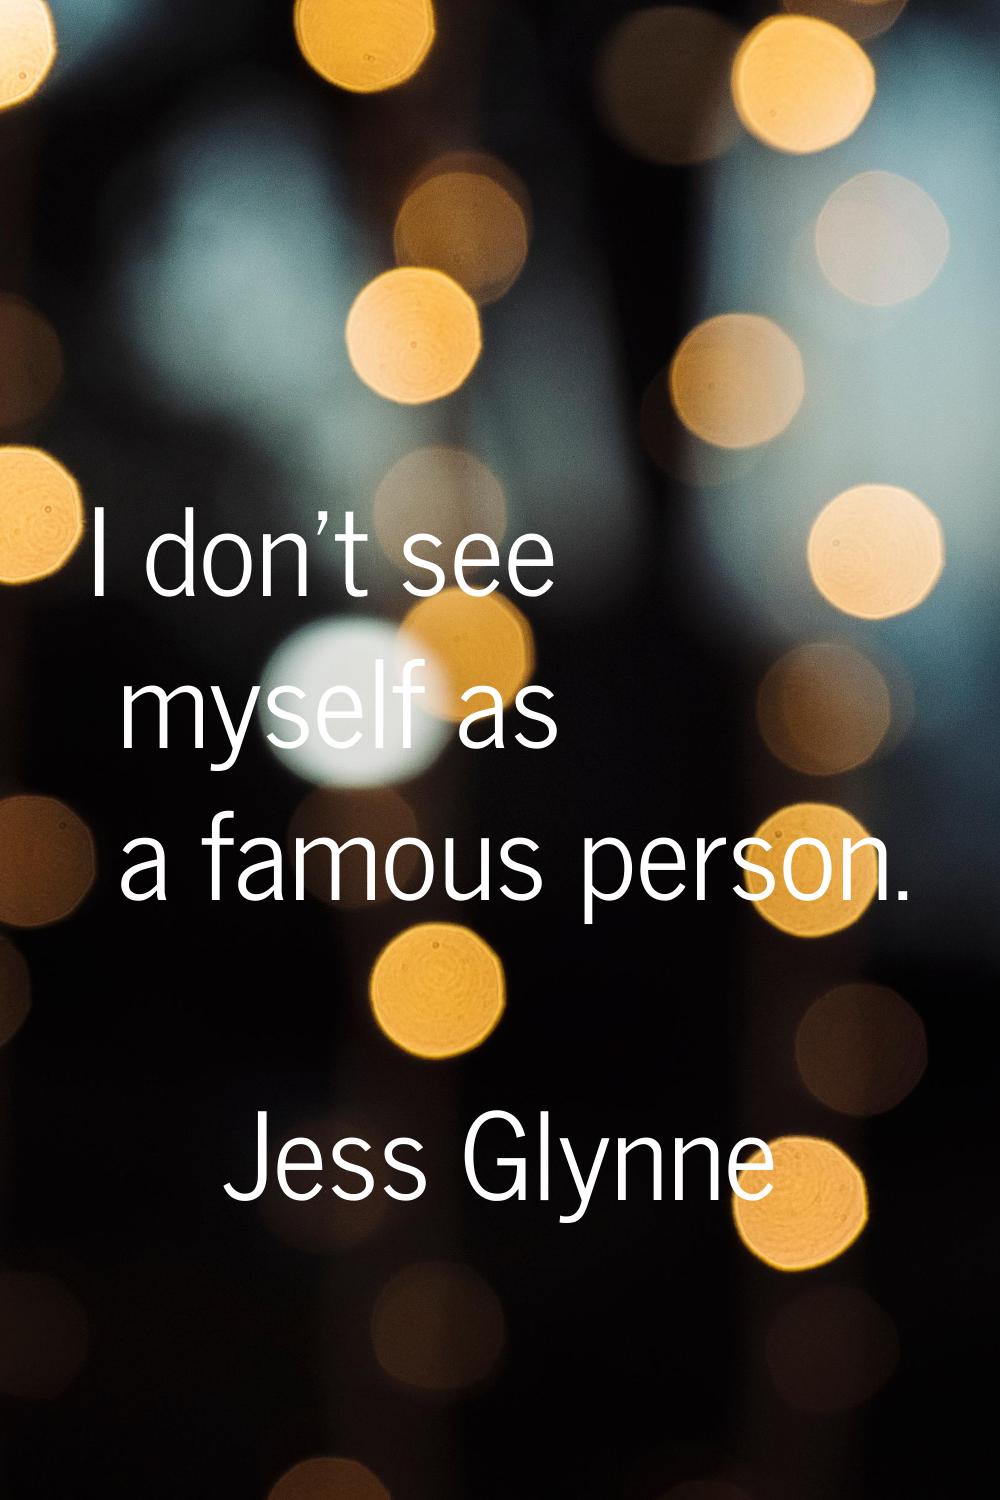 I don't see myself as a famous person.